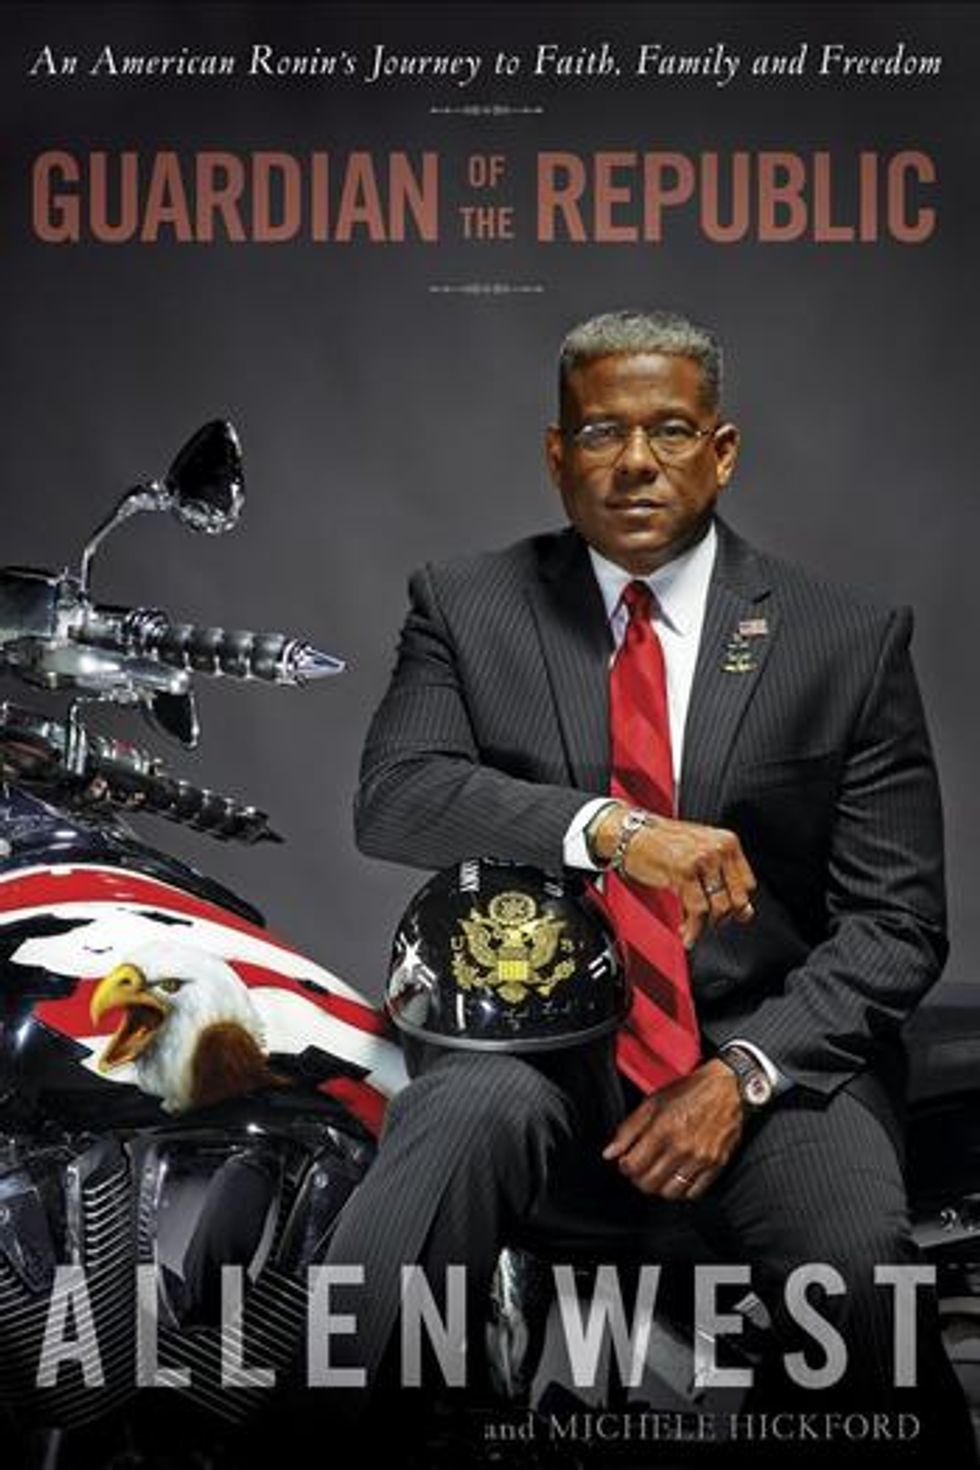 Allen West's 'EPA Is Doing Gun Control' Column Isn't Just Loony, Tin-Foil-Hatty, It's Also Very Plagiarized